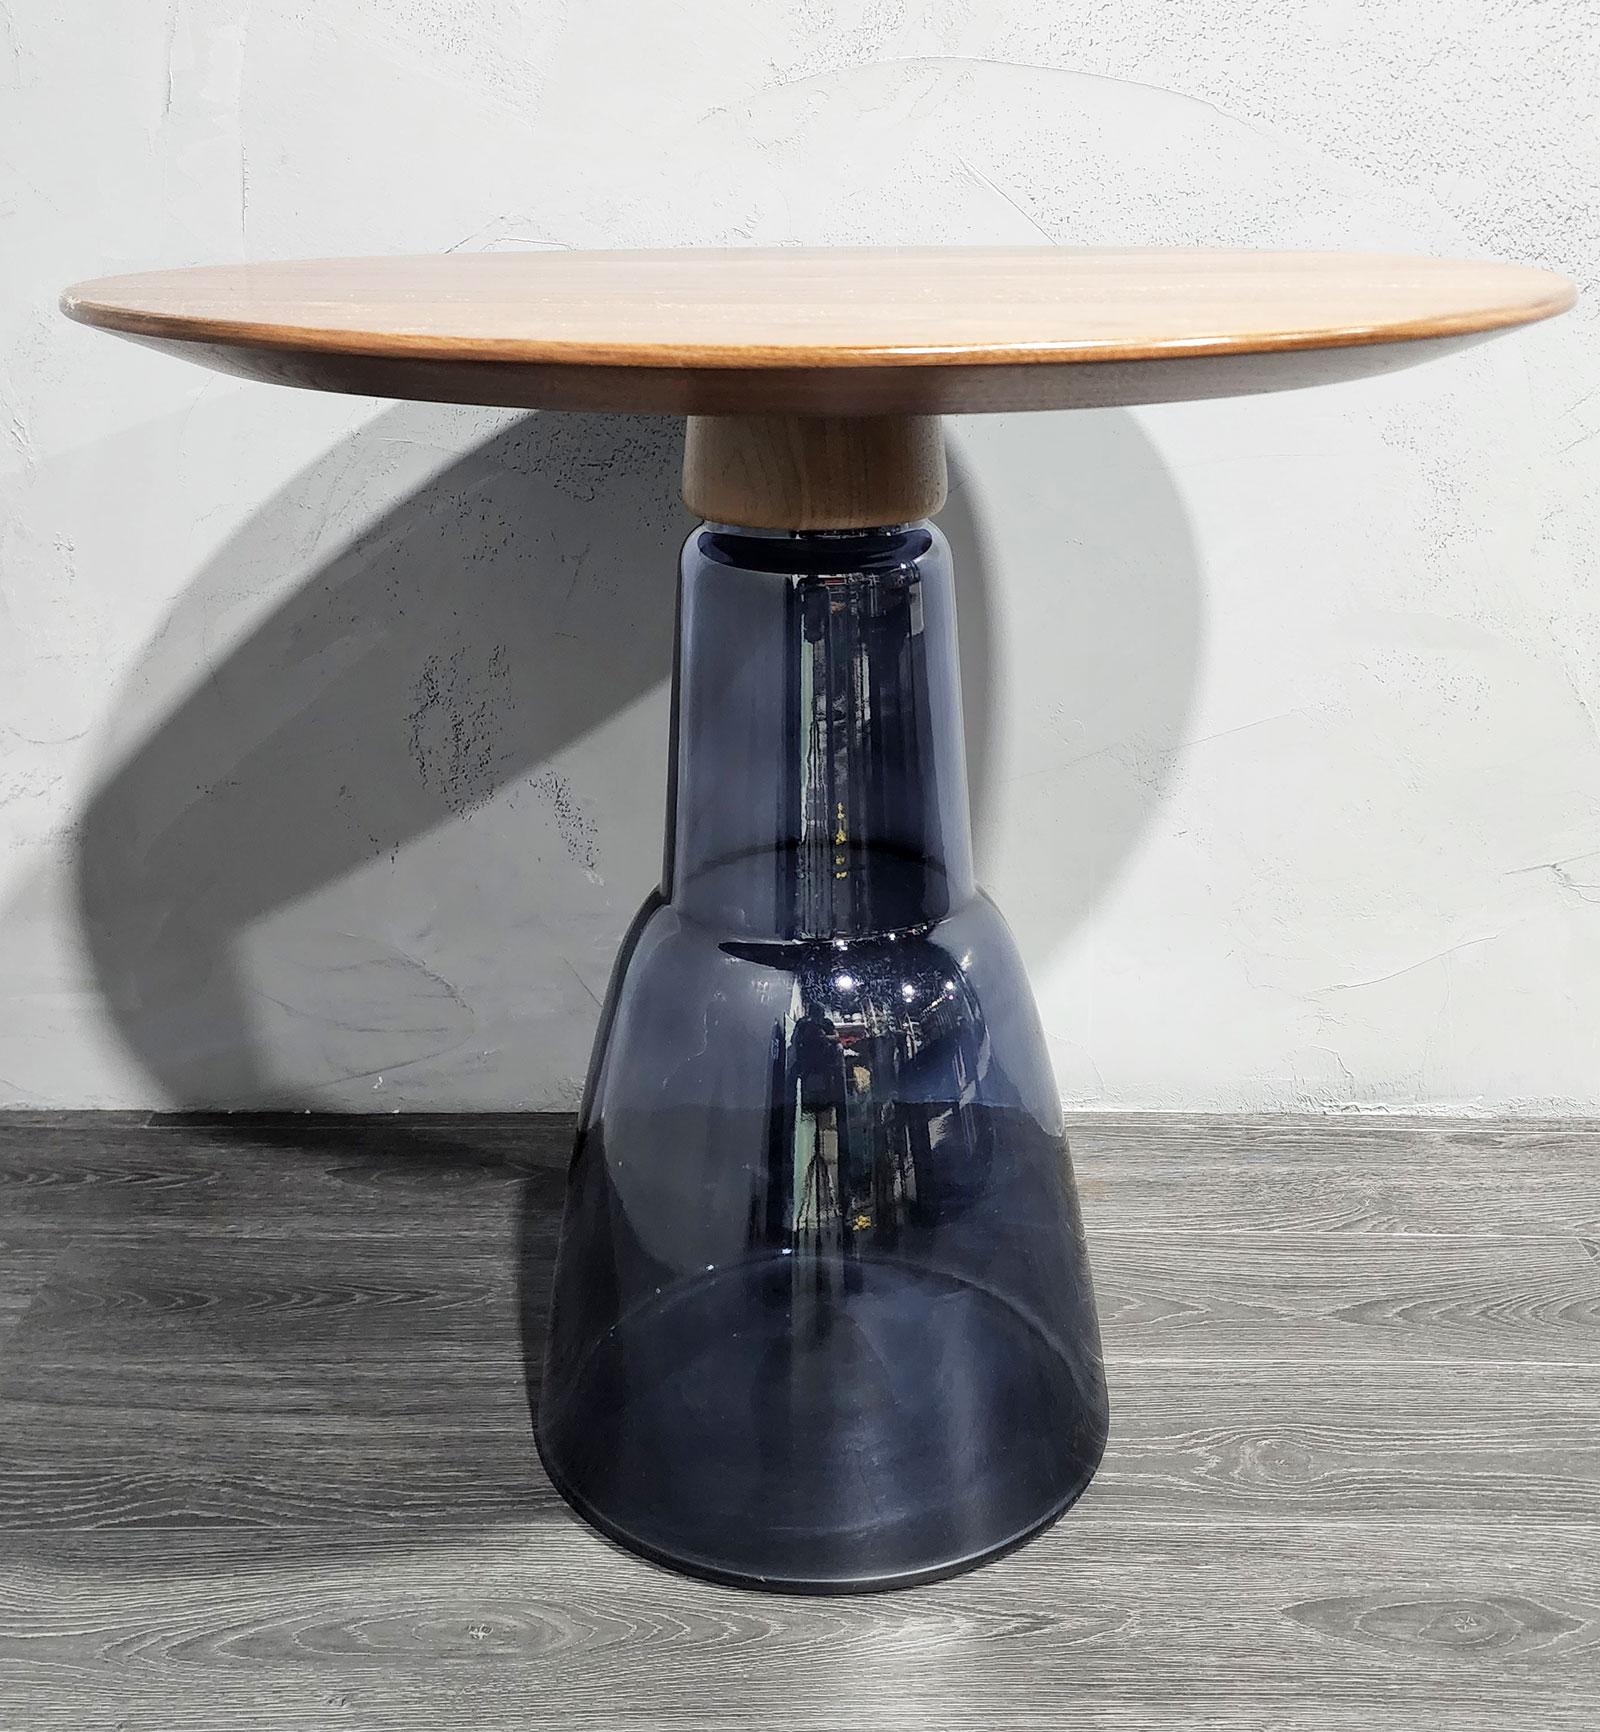 Round side table featuring a tinted Venetian blown glass base and an American walnut, compound curve veneered top. Inspired by the legendary Alchemist's alembics, its one-of-a-kind combination of materials makes this piece the gracefully light,